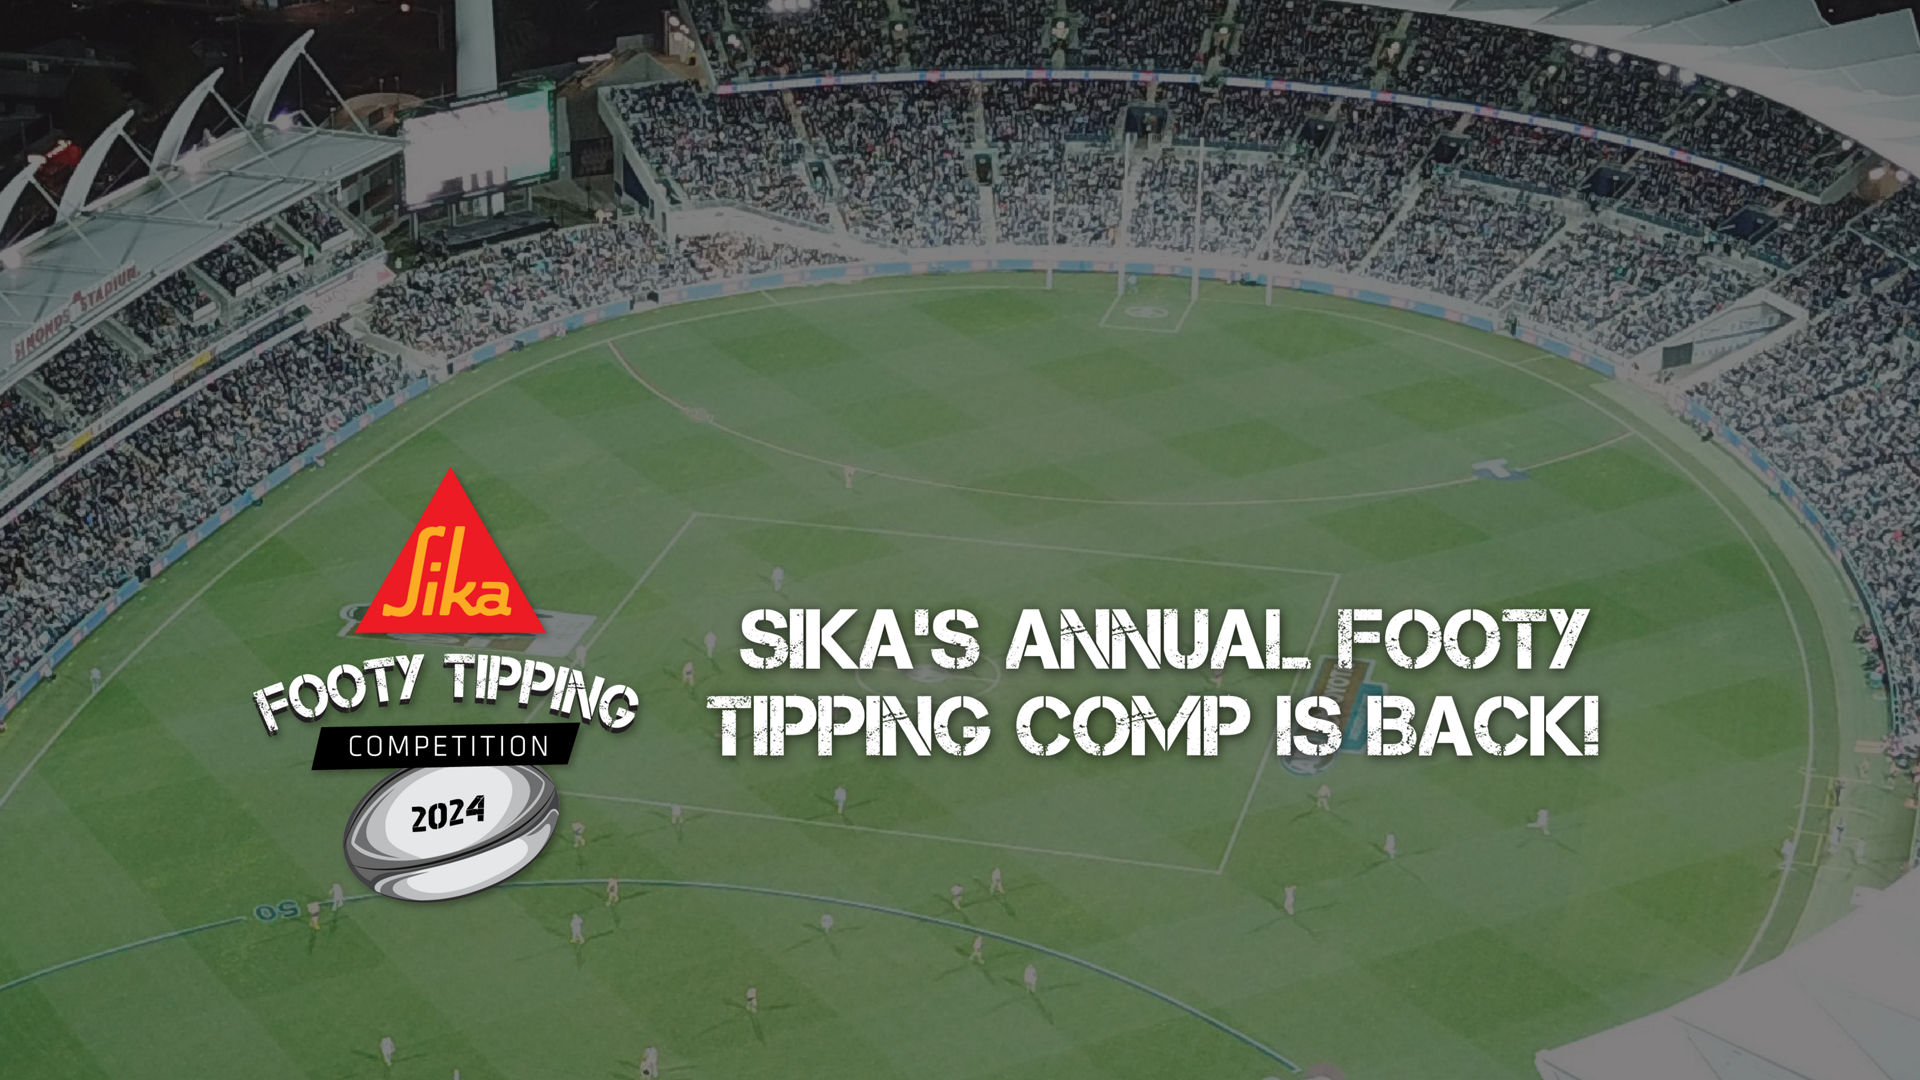 au-Sika-Footy-Tipping-Web-Banner